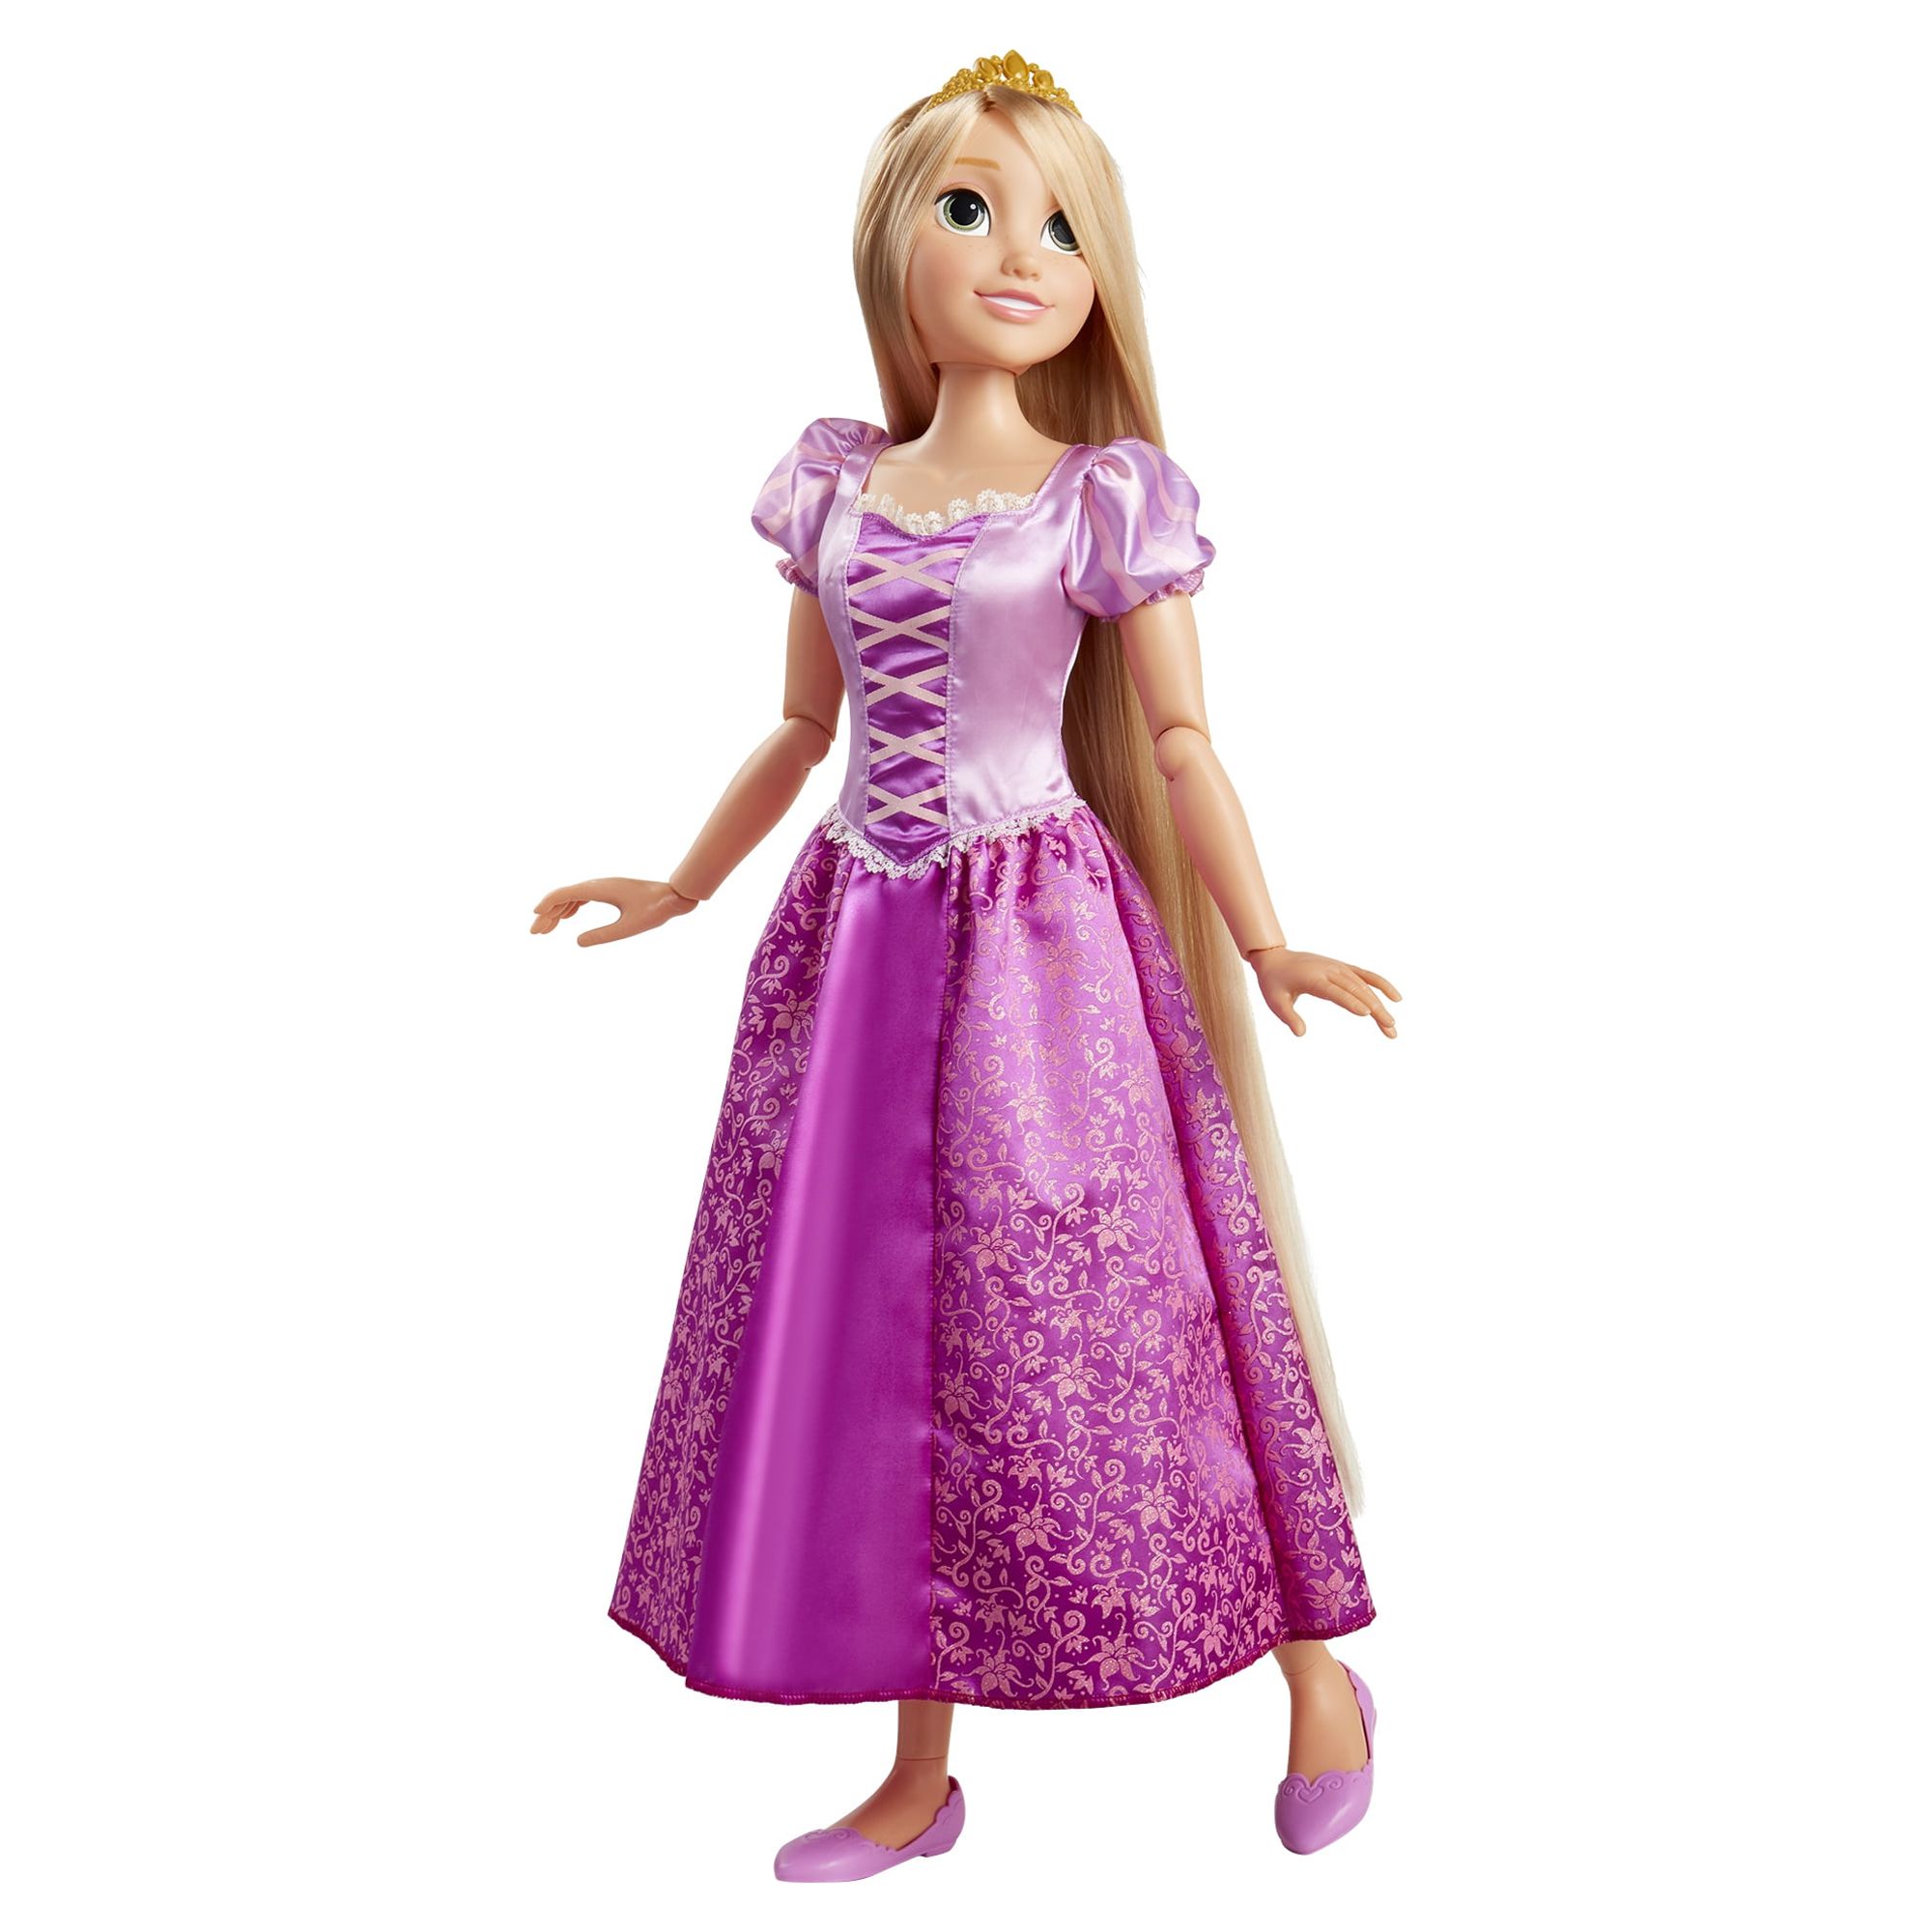 Disney Princess 32 inch Playdate Rapunzel Doll, for Children Ages 3+ - image 5 of 8